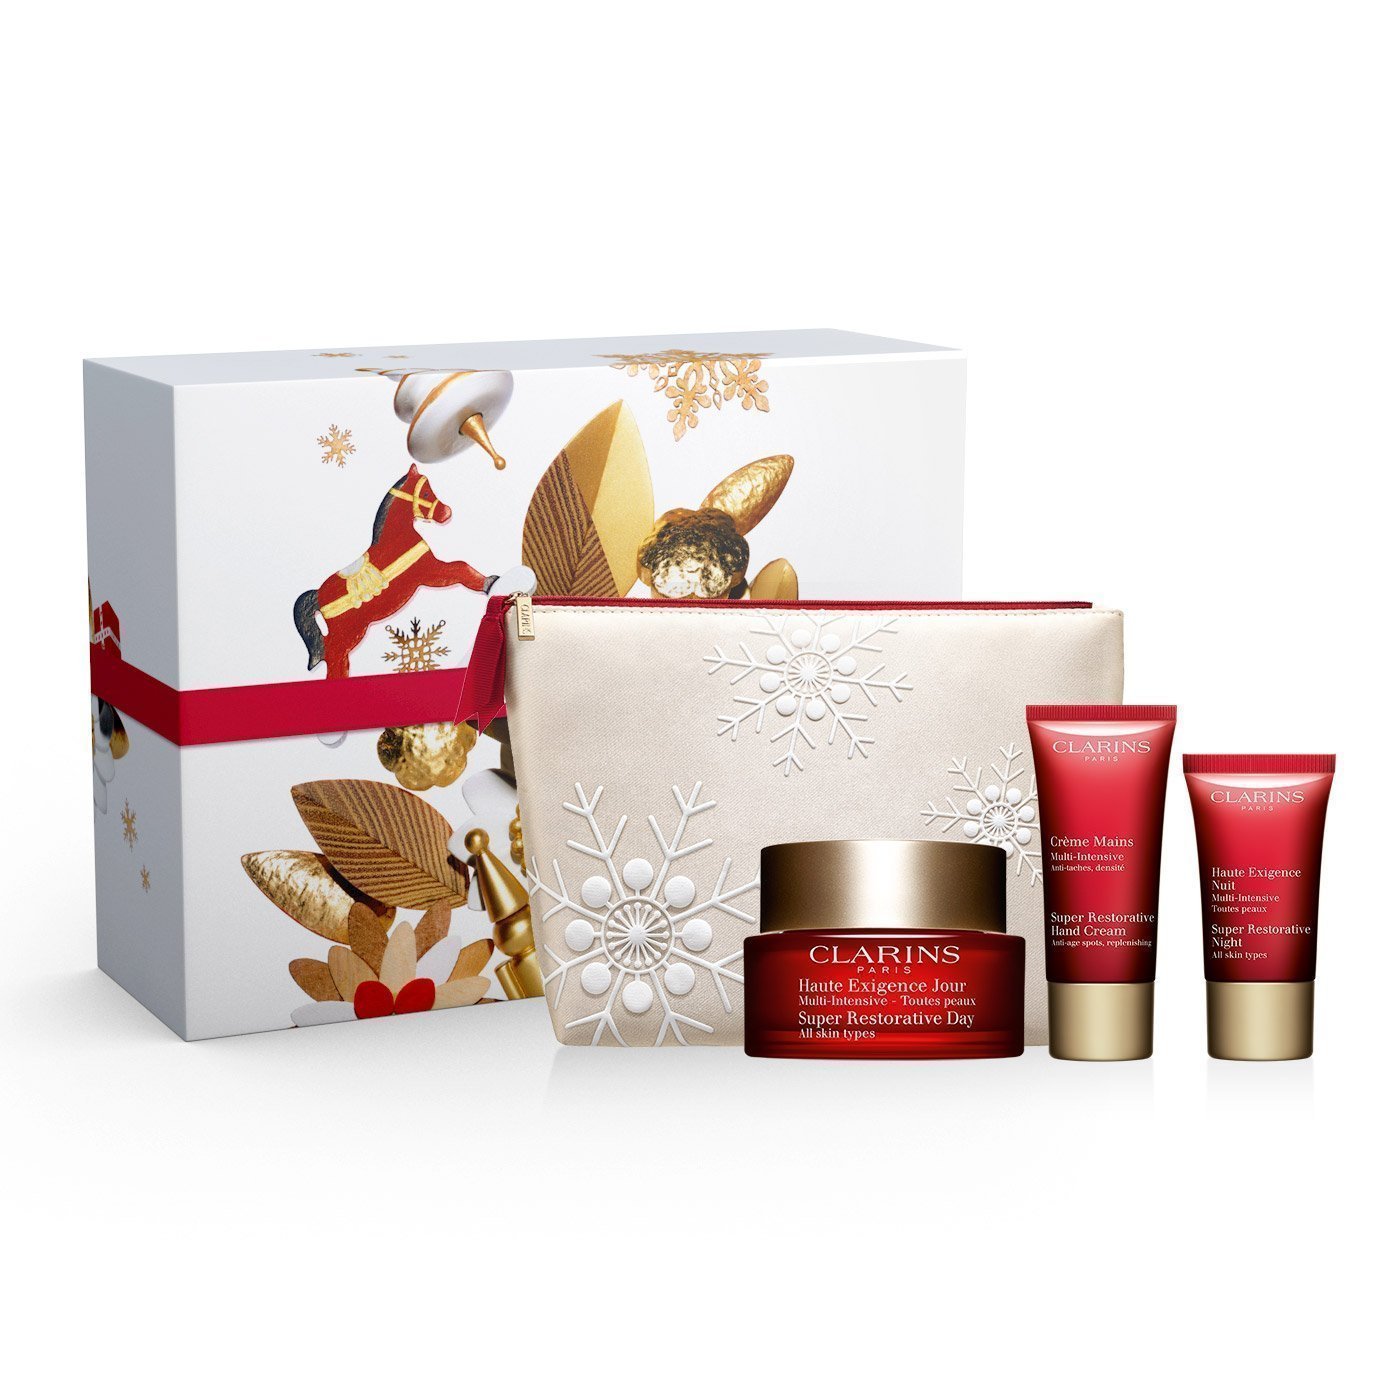 Clarins beauty sets